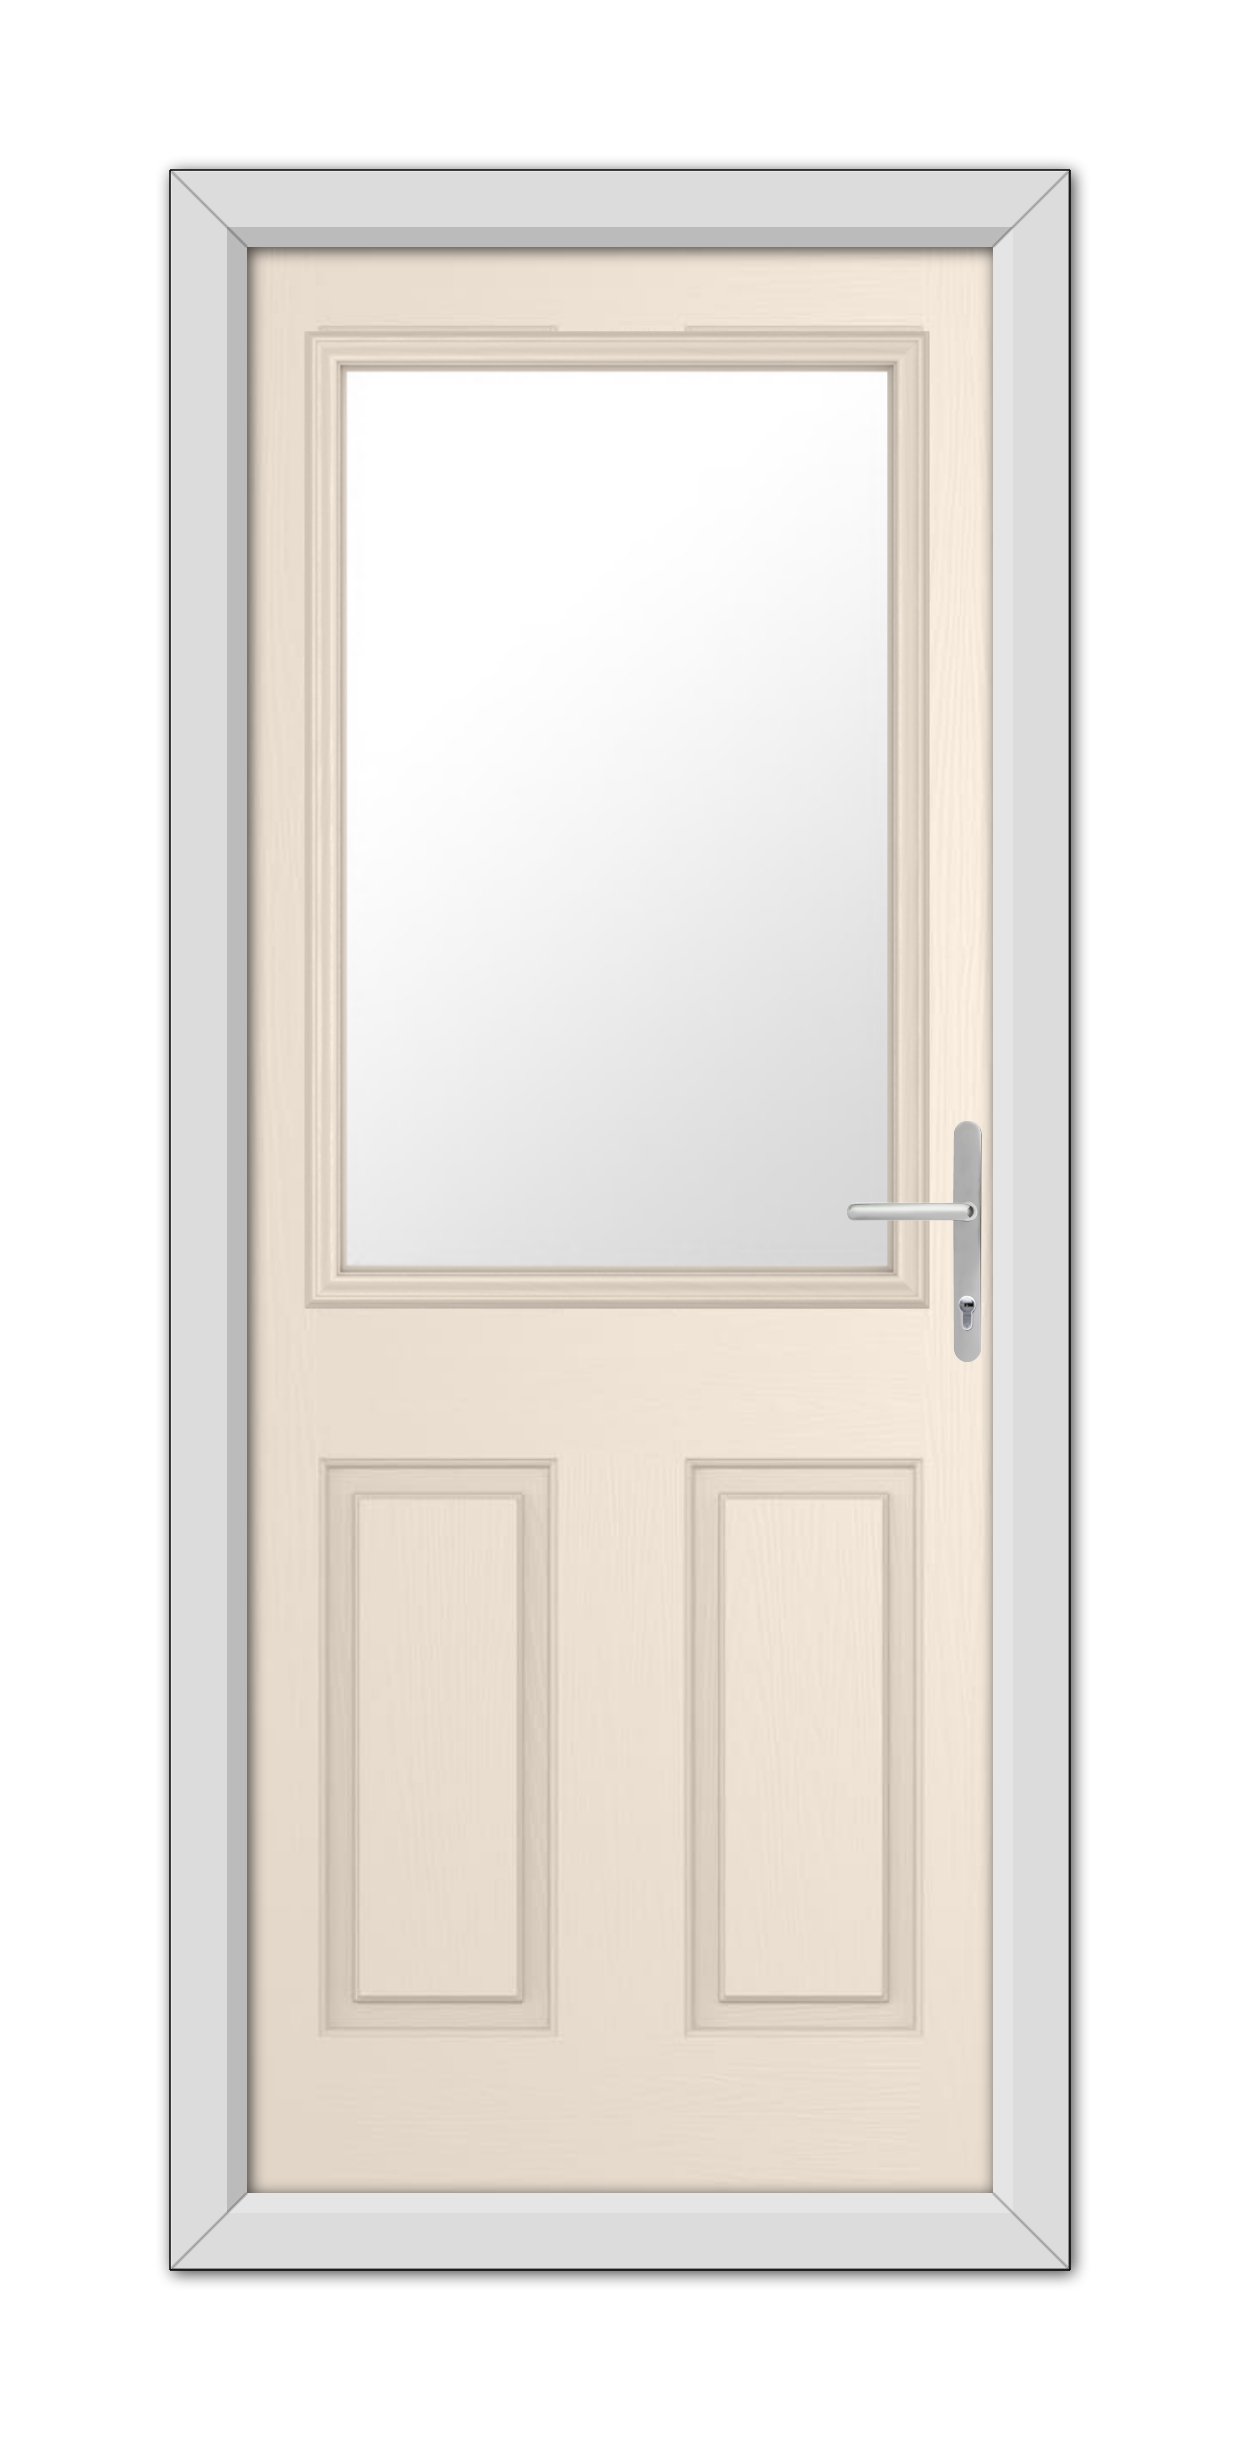 A modern Cream Buxton Composite Door 48mm Timber Core with a glass panel at the top, featuring a metallic handle on the right side, set within a simple frame.